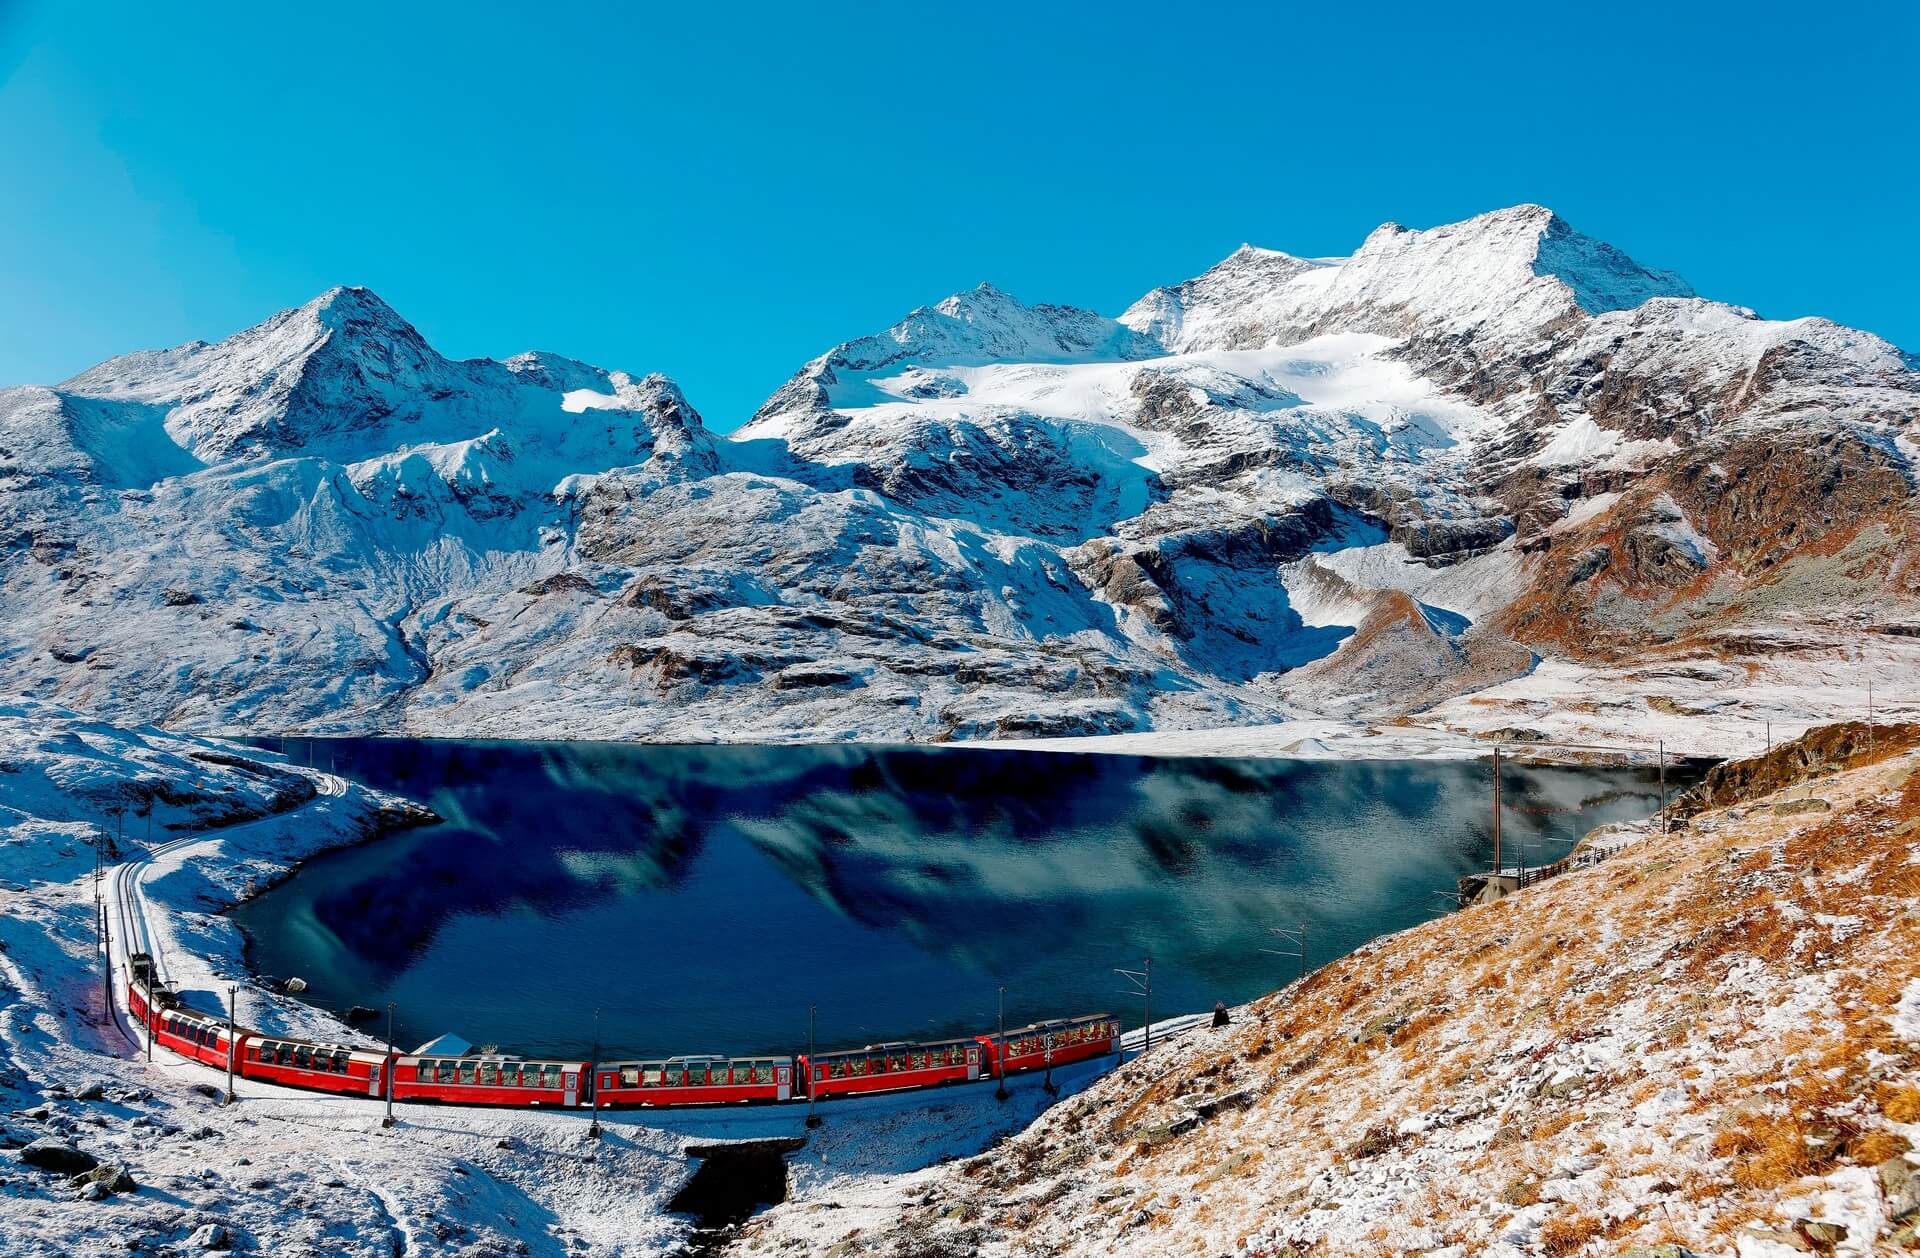 A Bernina Express train traveling along the lake shore of Lago Bianco & alpine mountains towering under blue sky in background after a snowfall in autumn, near Ospizio Bernina, in Grisons, Switzerland
